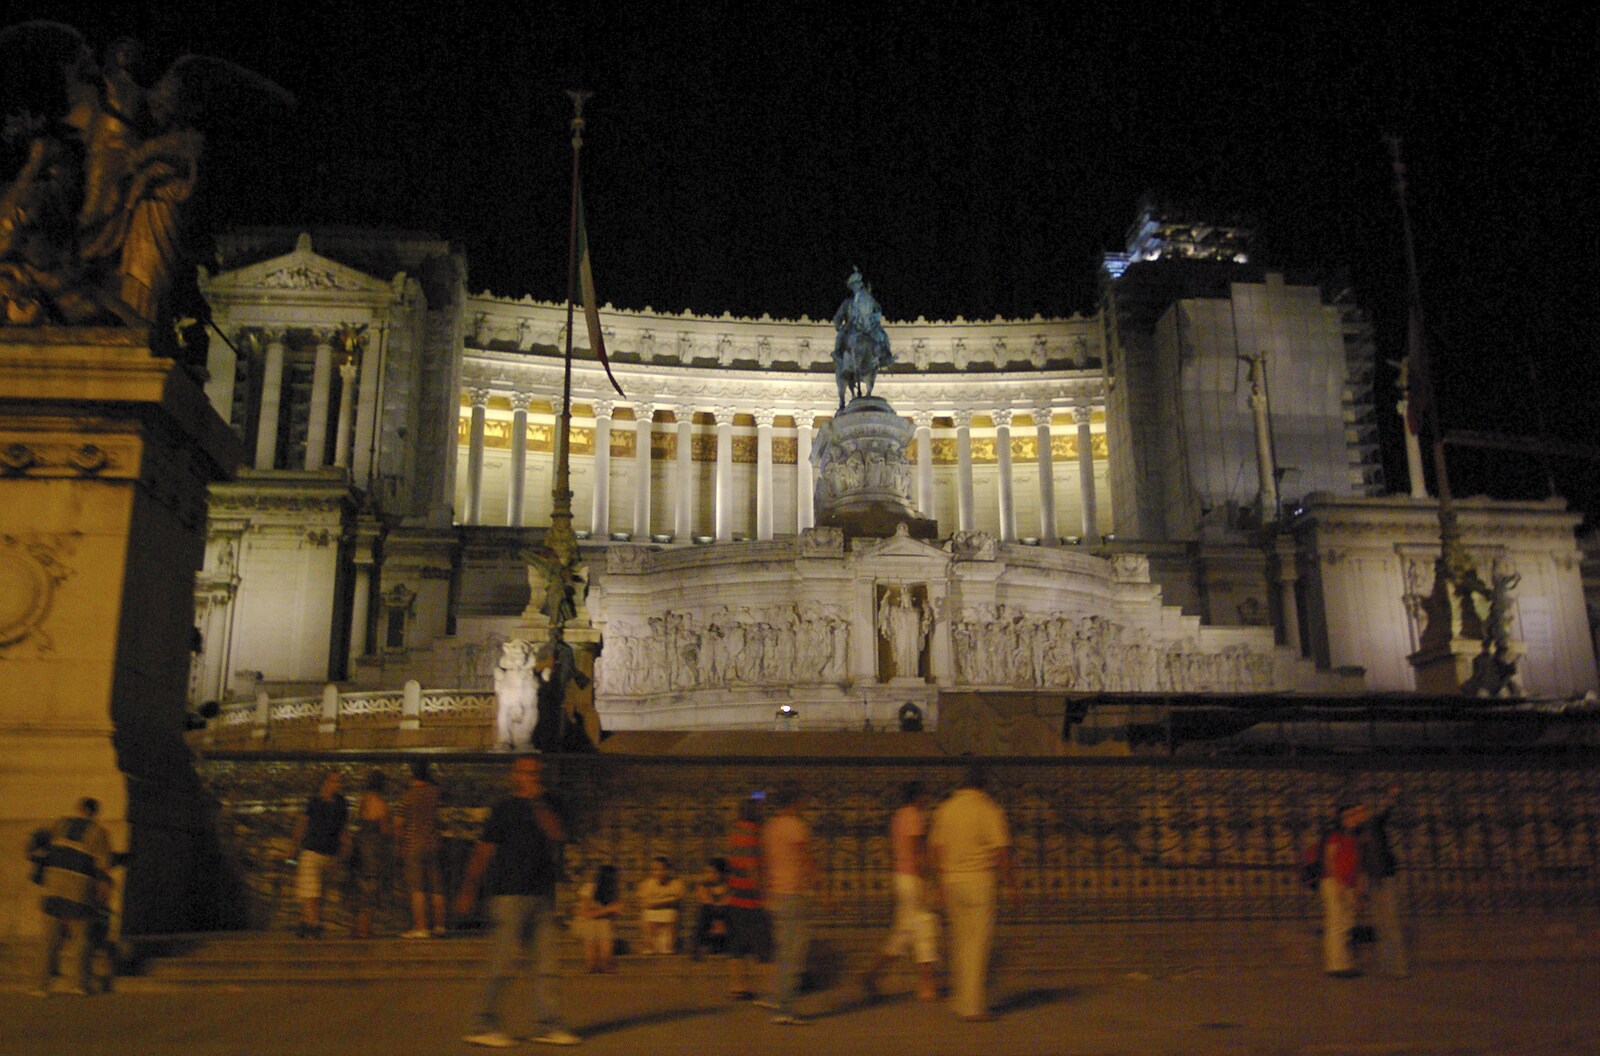 The Altare della Patria by night from A Sojourn in The Eternal City, Rome, Italy - 22nd July 2008